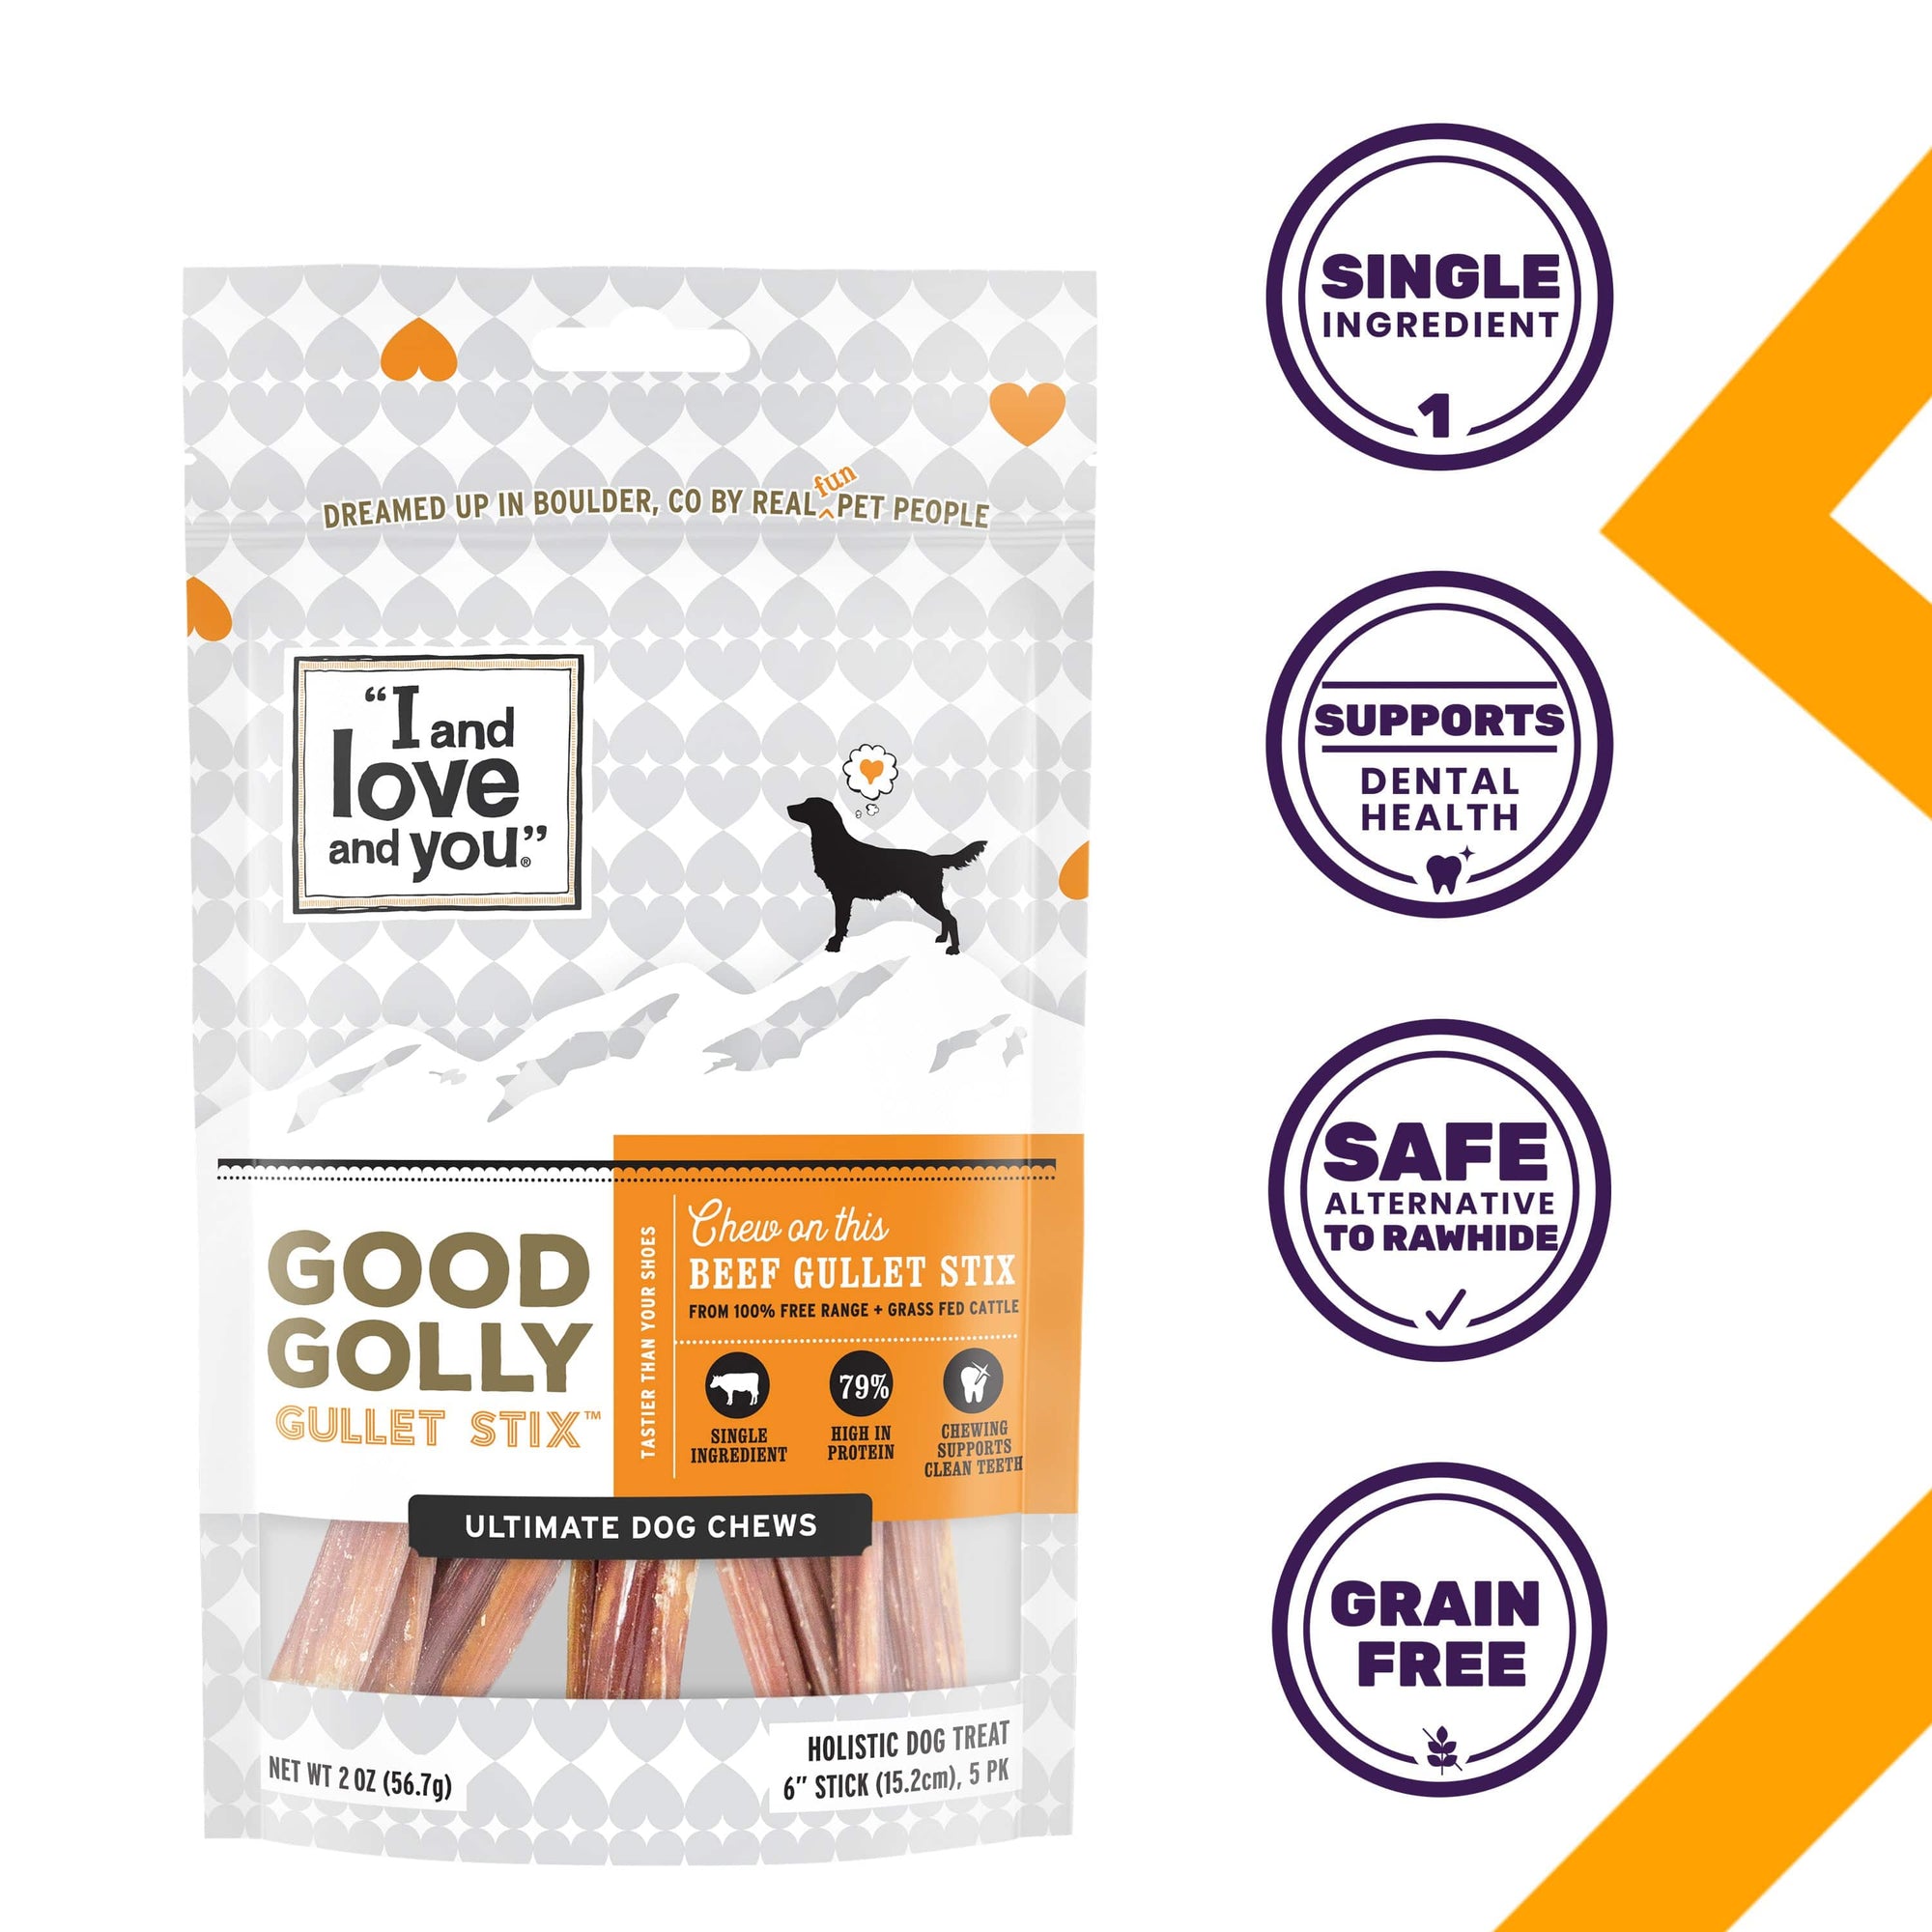 Good Golly Gullet Stix package with dog treats, dog silhouette, text labels, and close-up label detail.